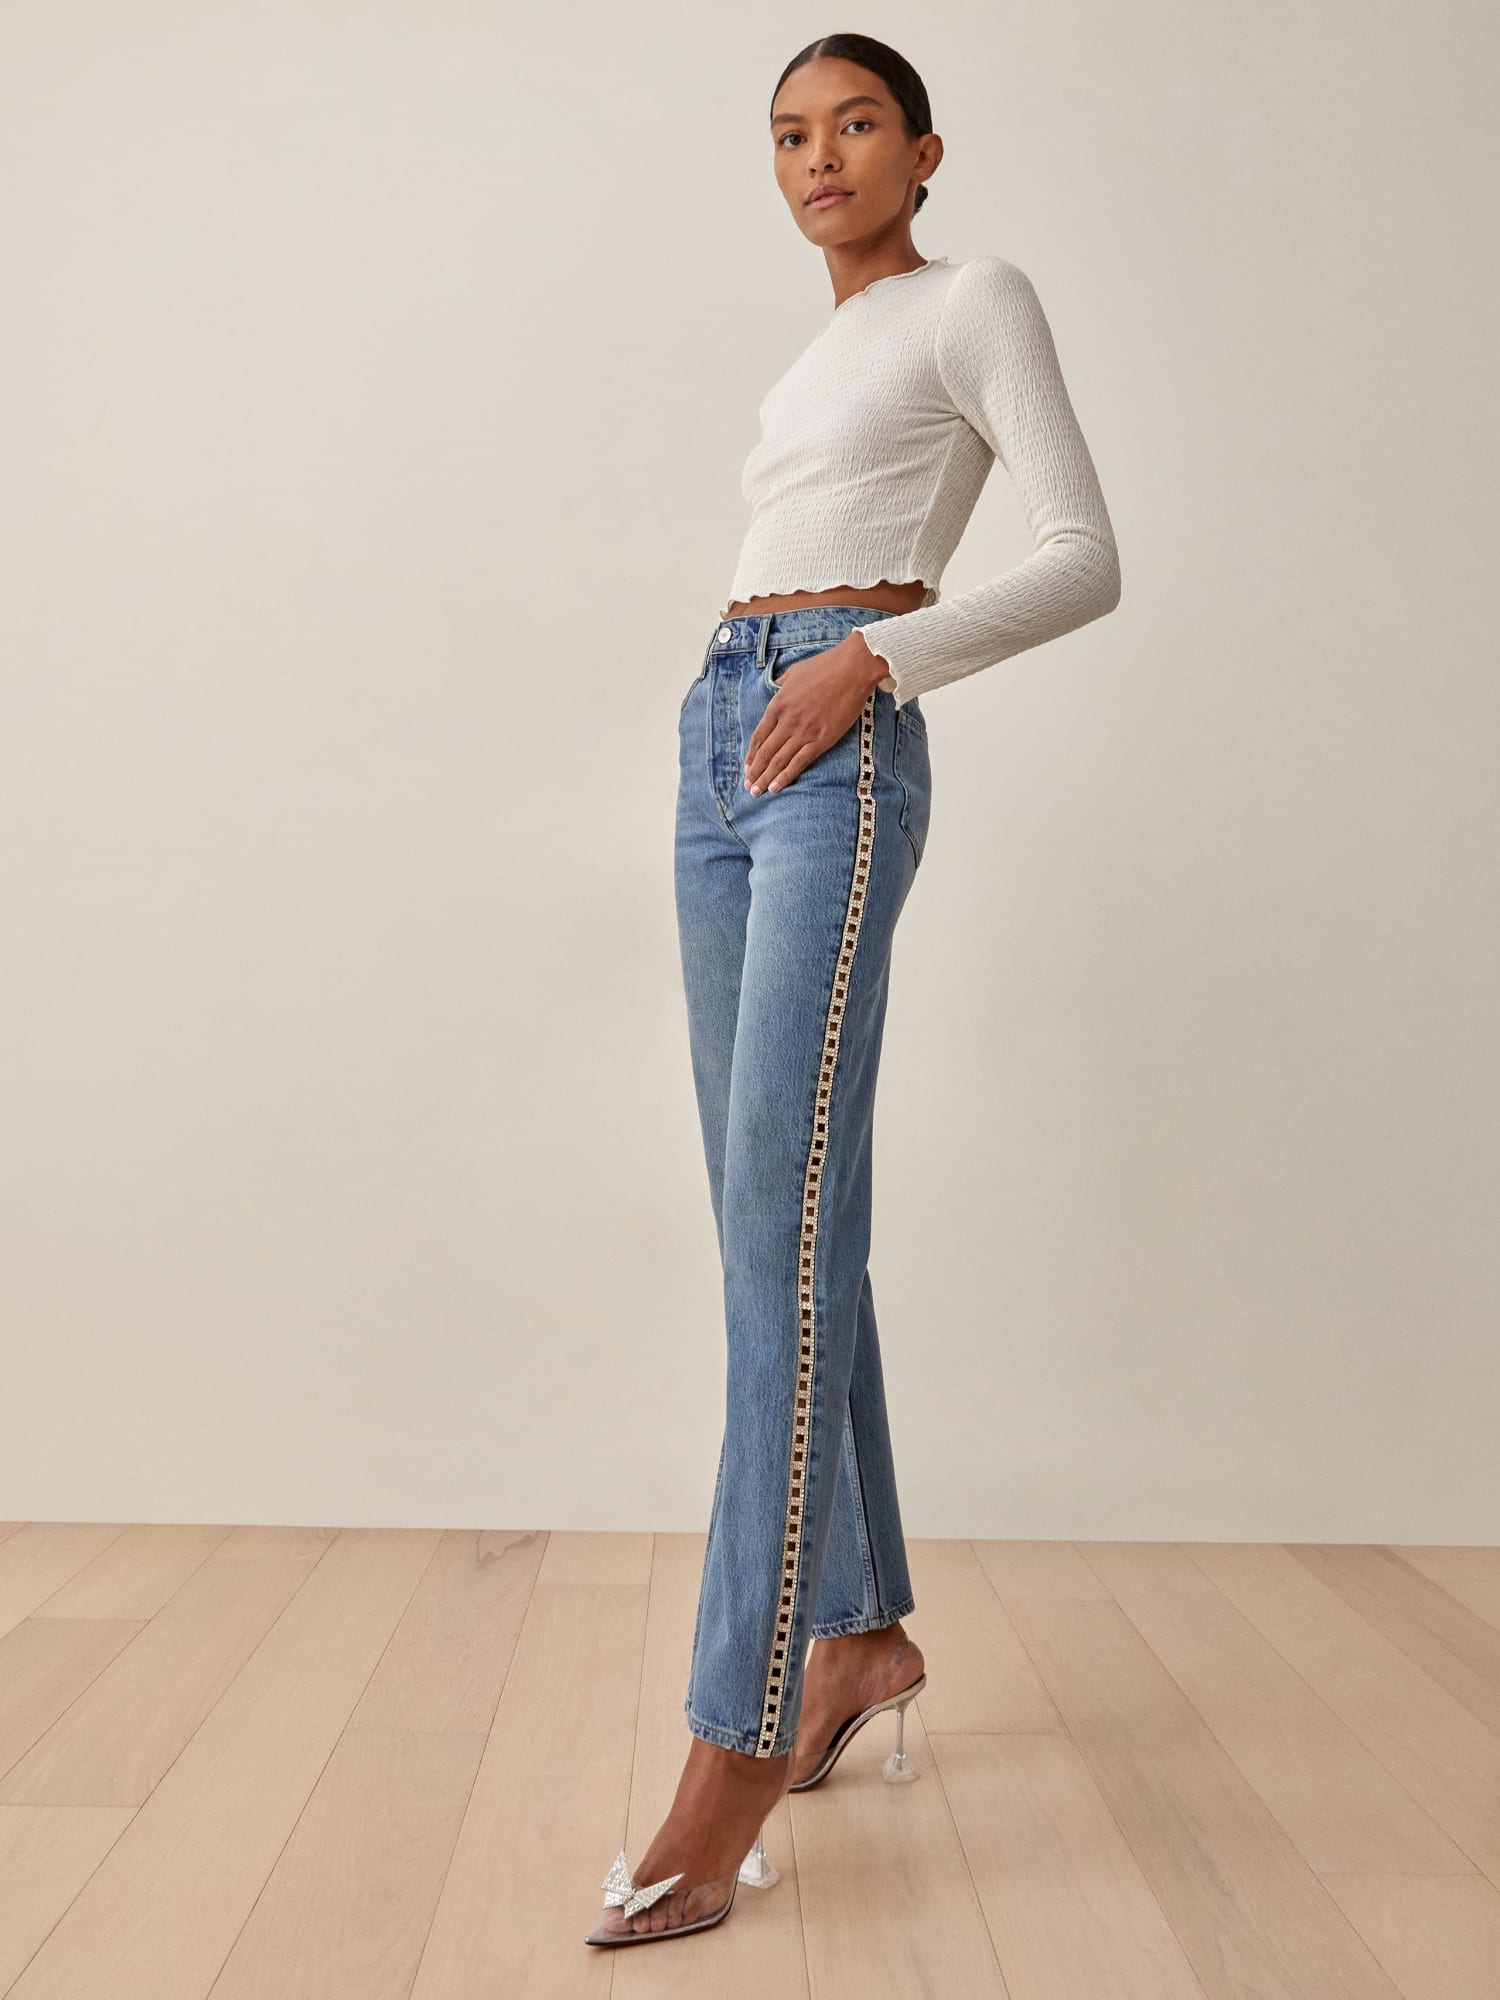 Reformation, Jeans